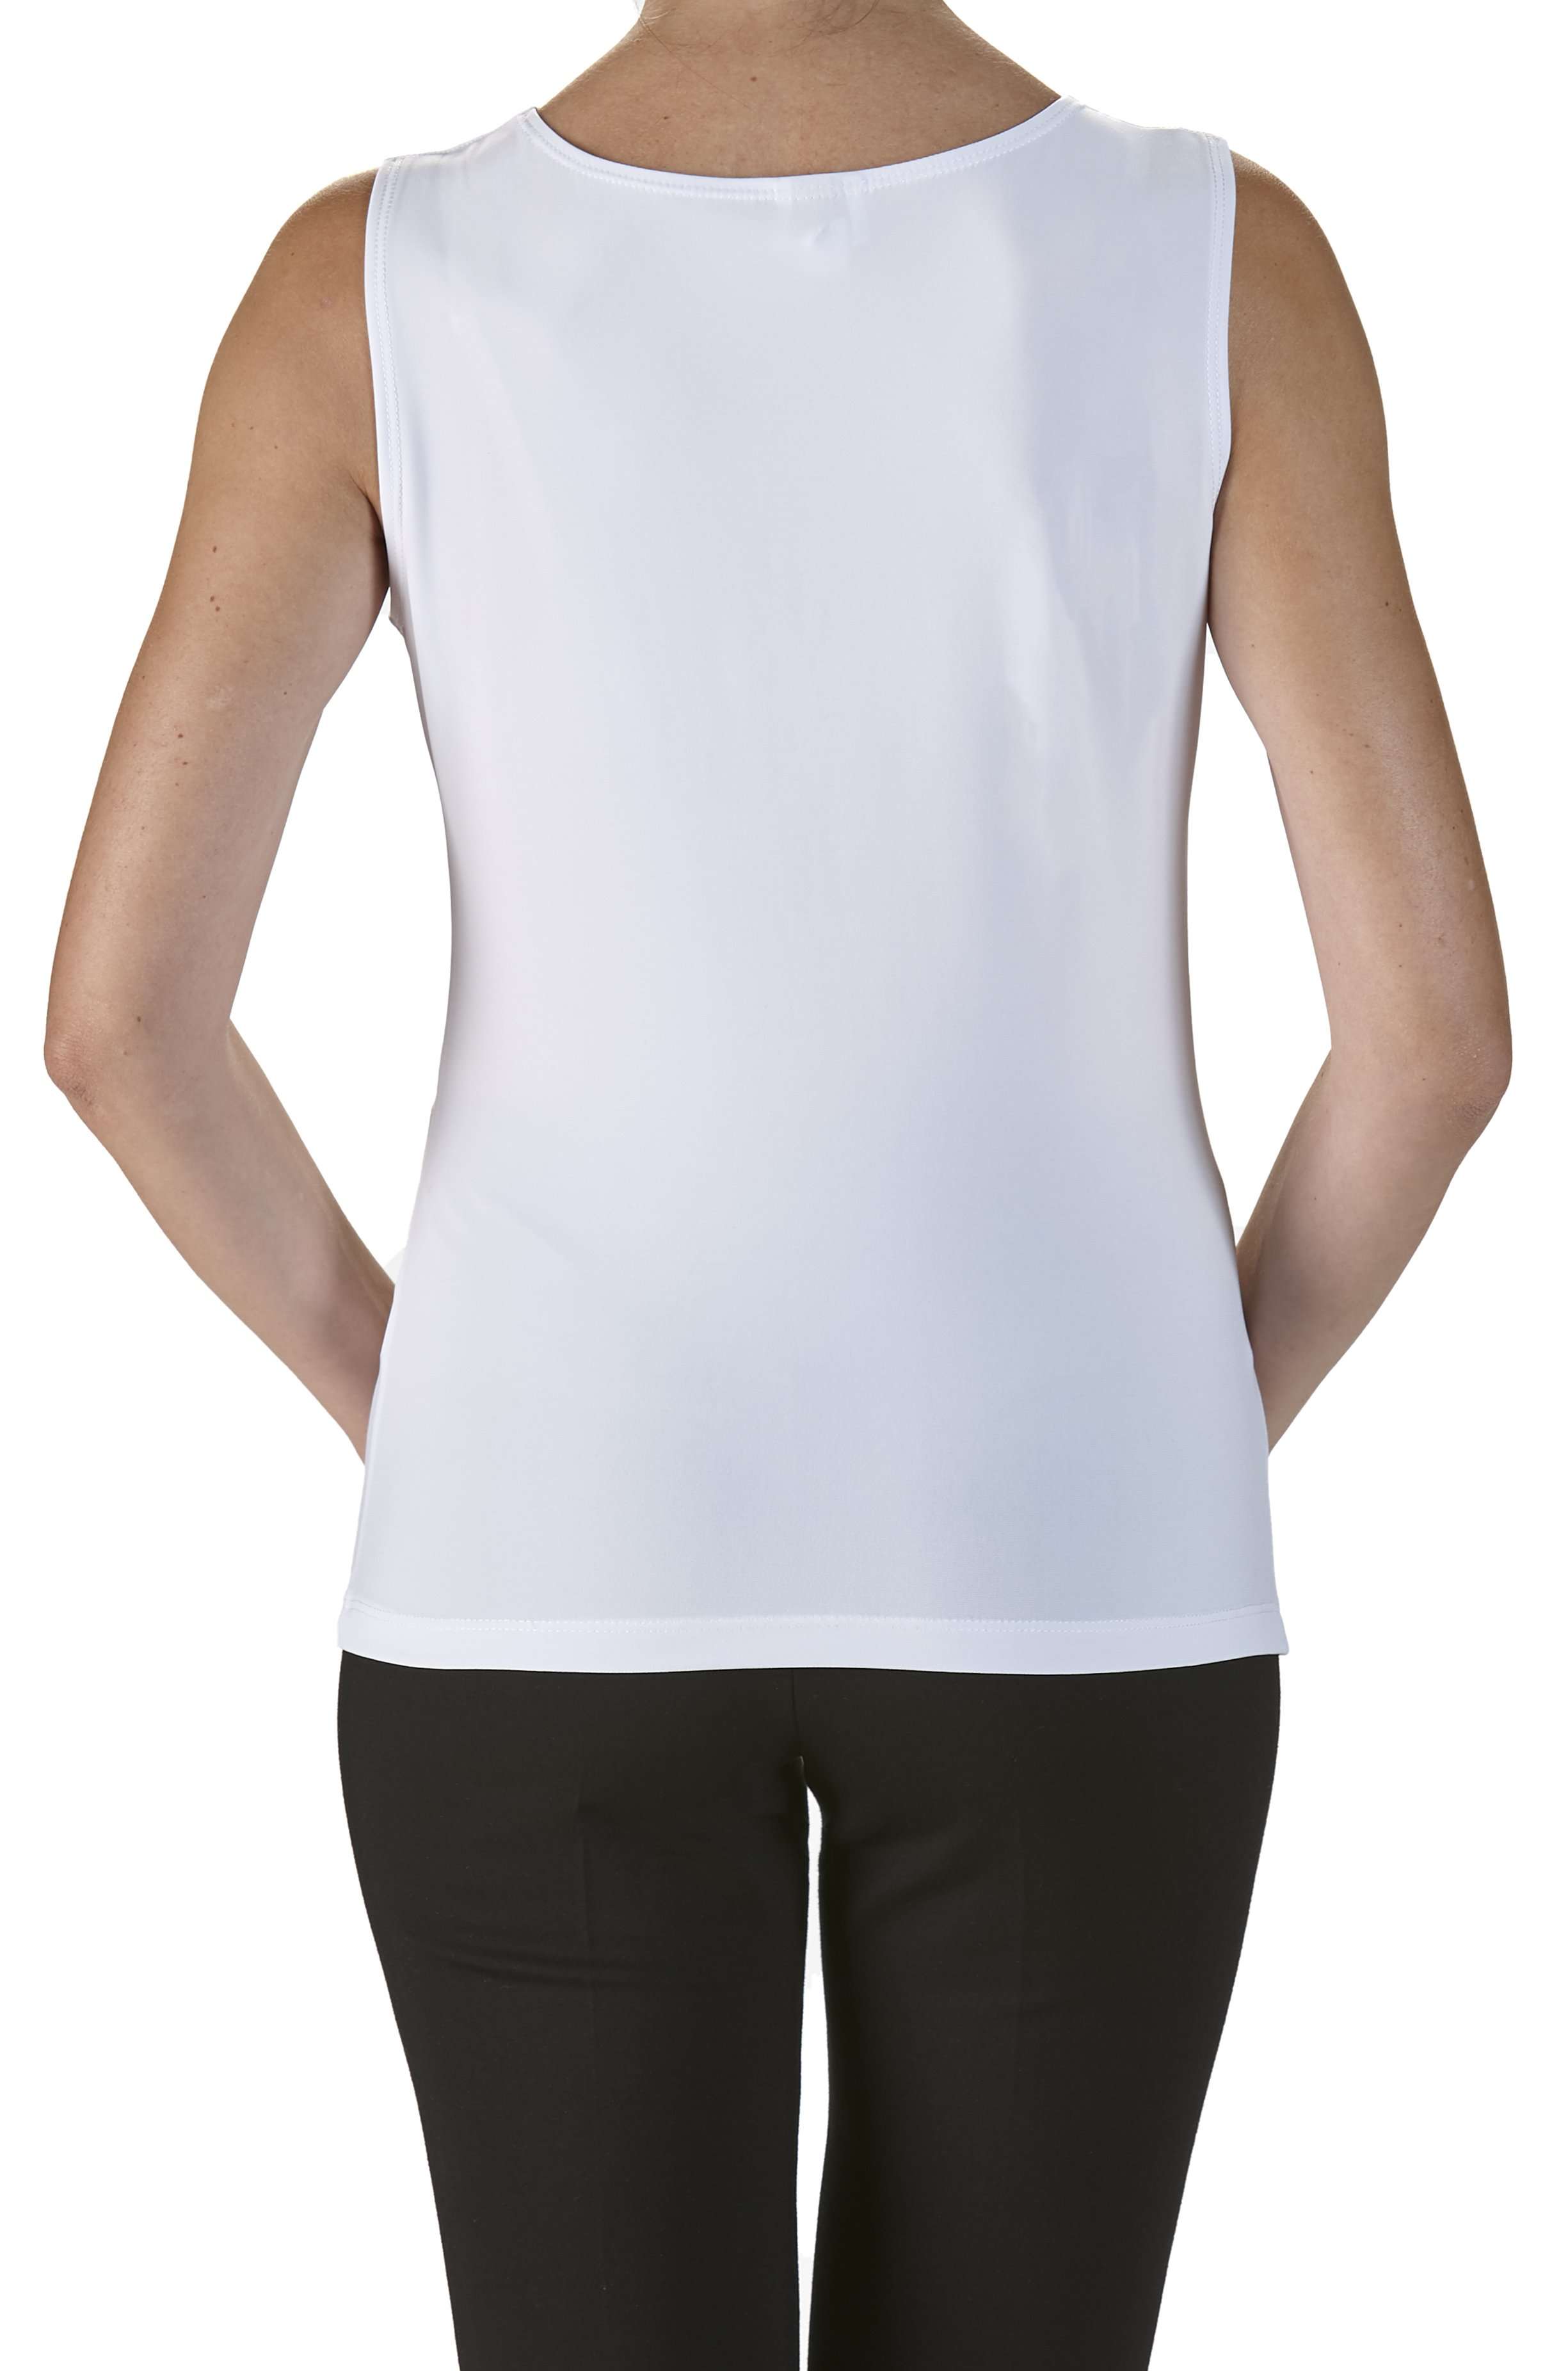 Women's White Draped Neckline Camisole Tank Top Quality Stretch Fabric Now 50% off Made in Canada - Yvonne Marie - Yvonne Marie